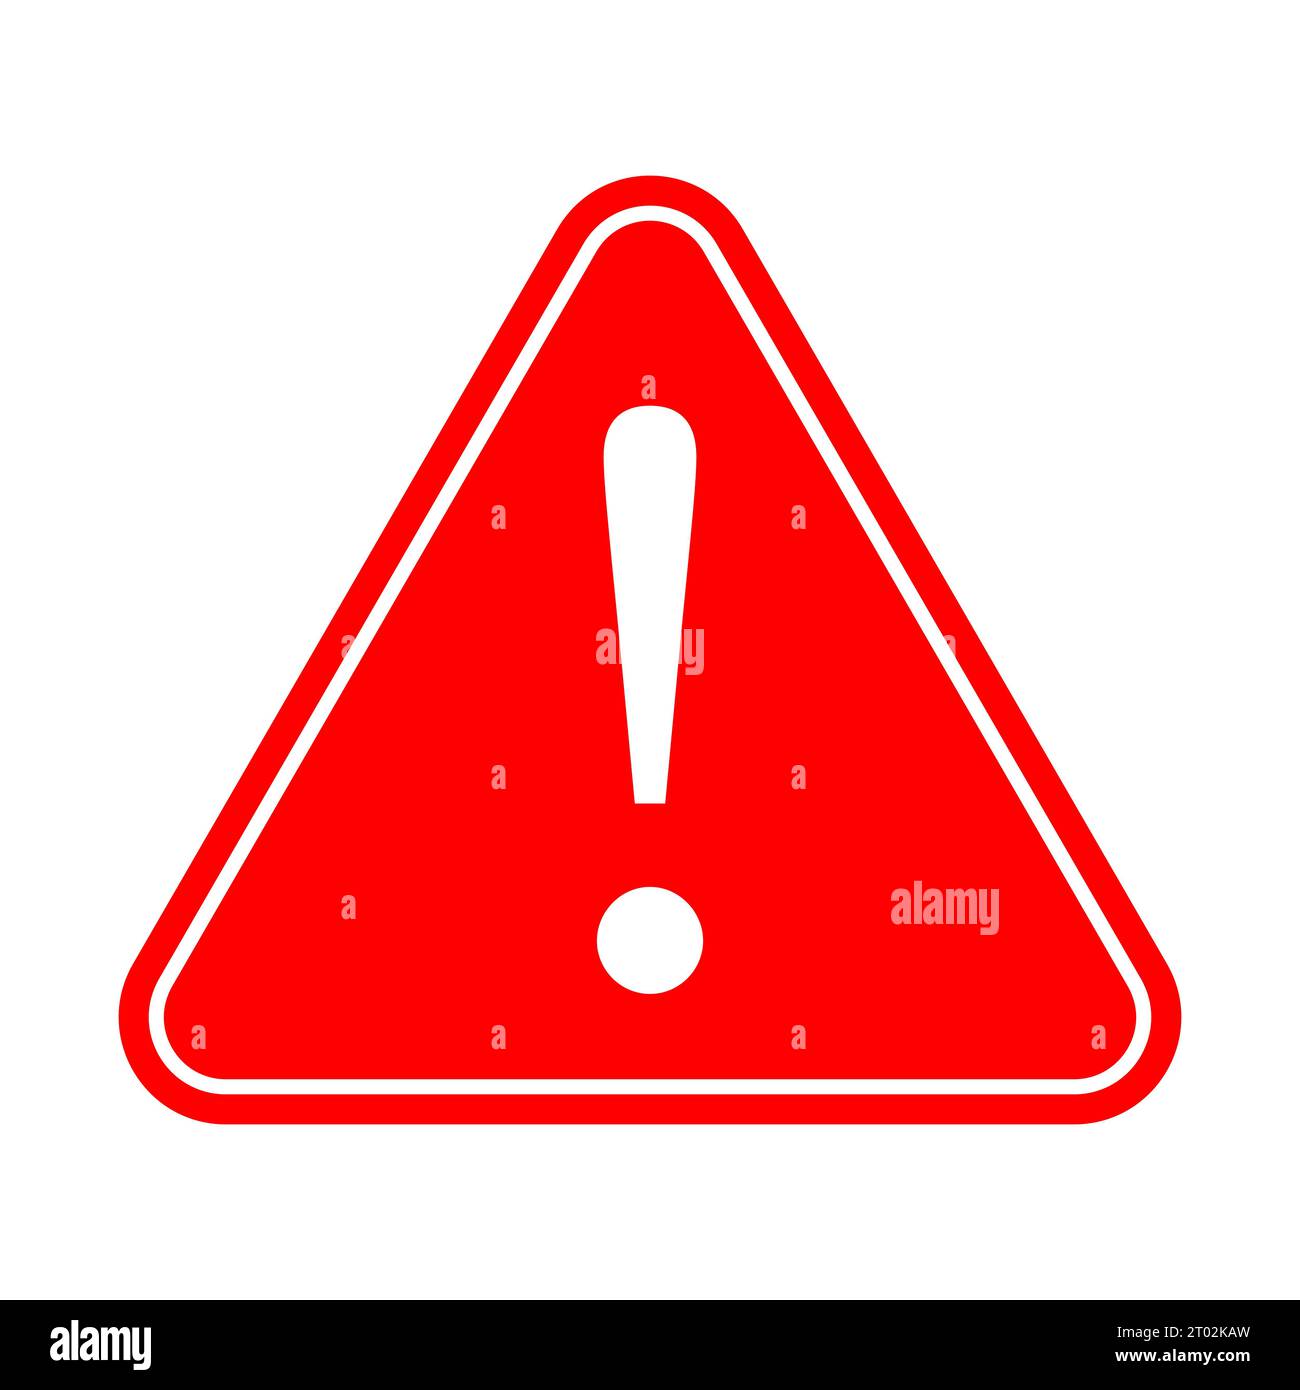 Red warning attention sign with exclamation mark symbol. Vector illustration isolated on white background Stock Vector